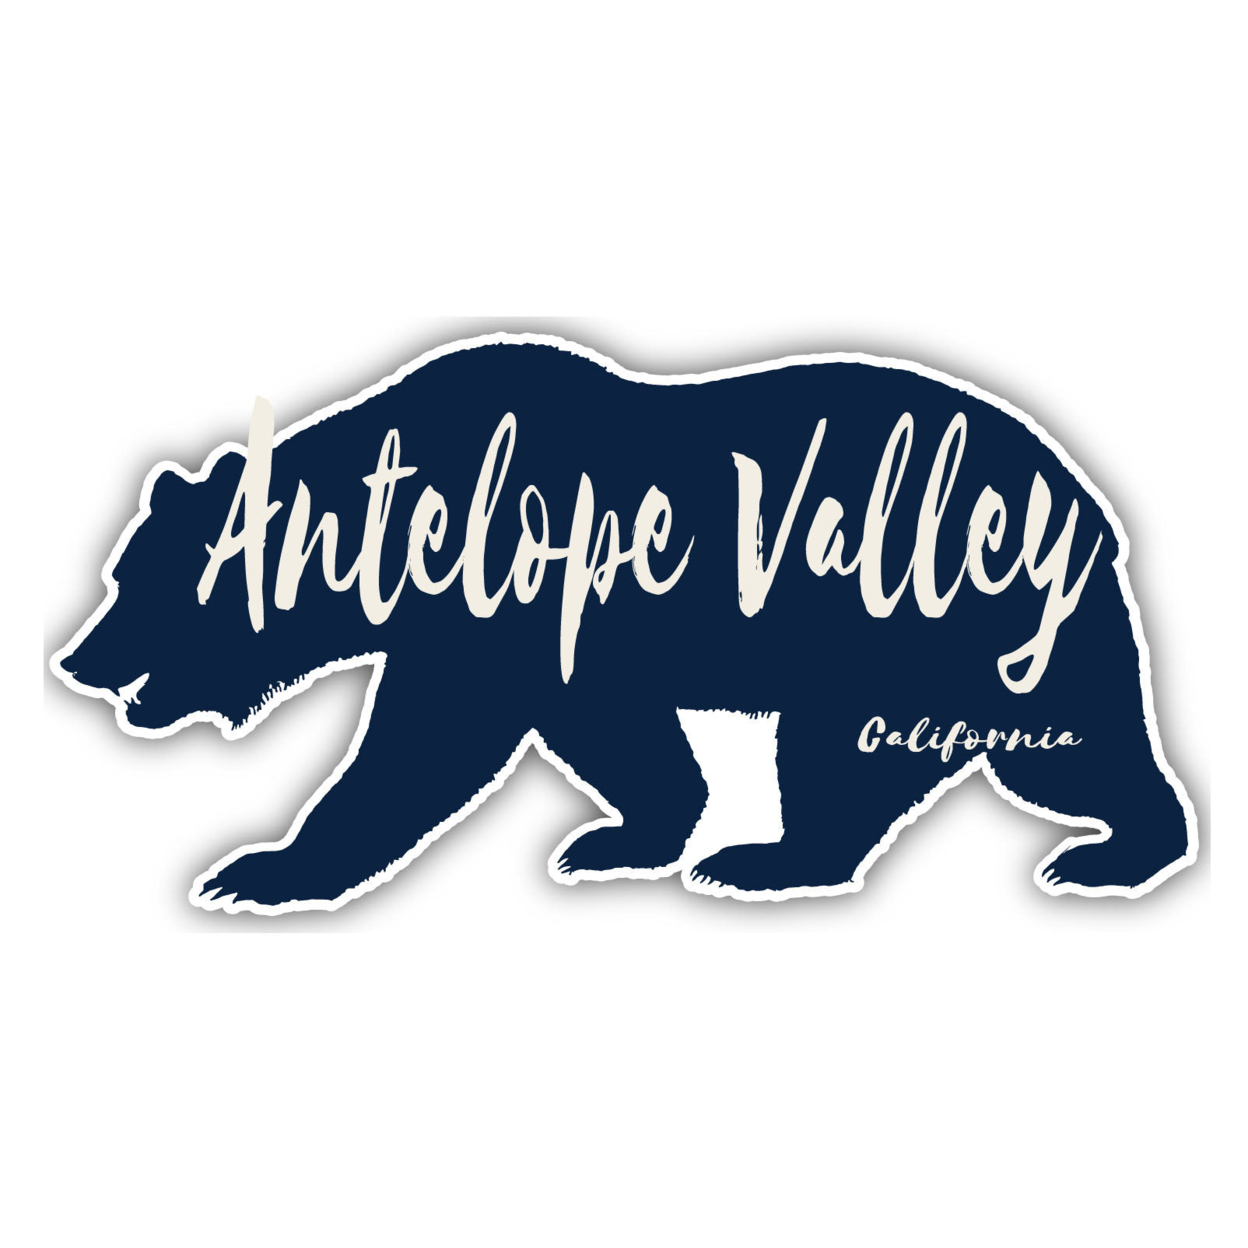 Antelope Valley California Souvenir Decorative Stickers (Choose Theme And Size) - Single Unit, 6-Inch, Tent